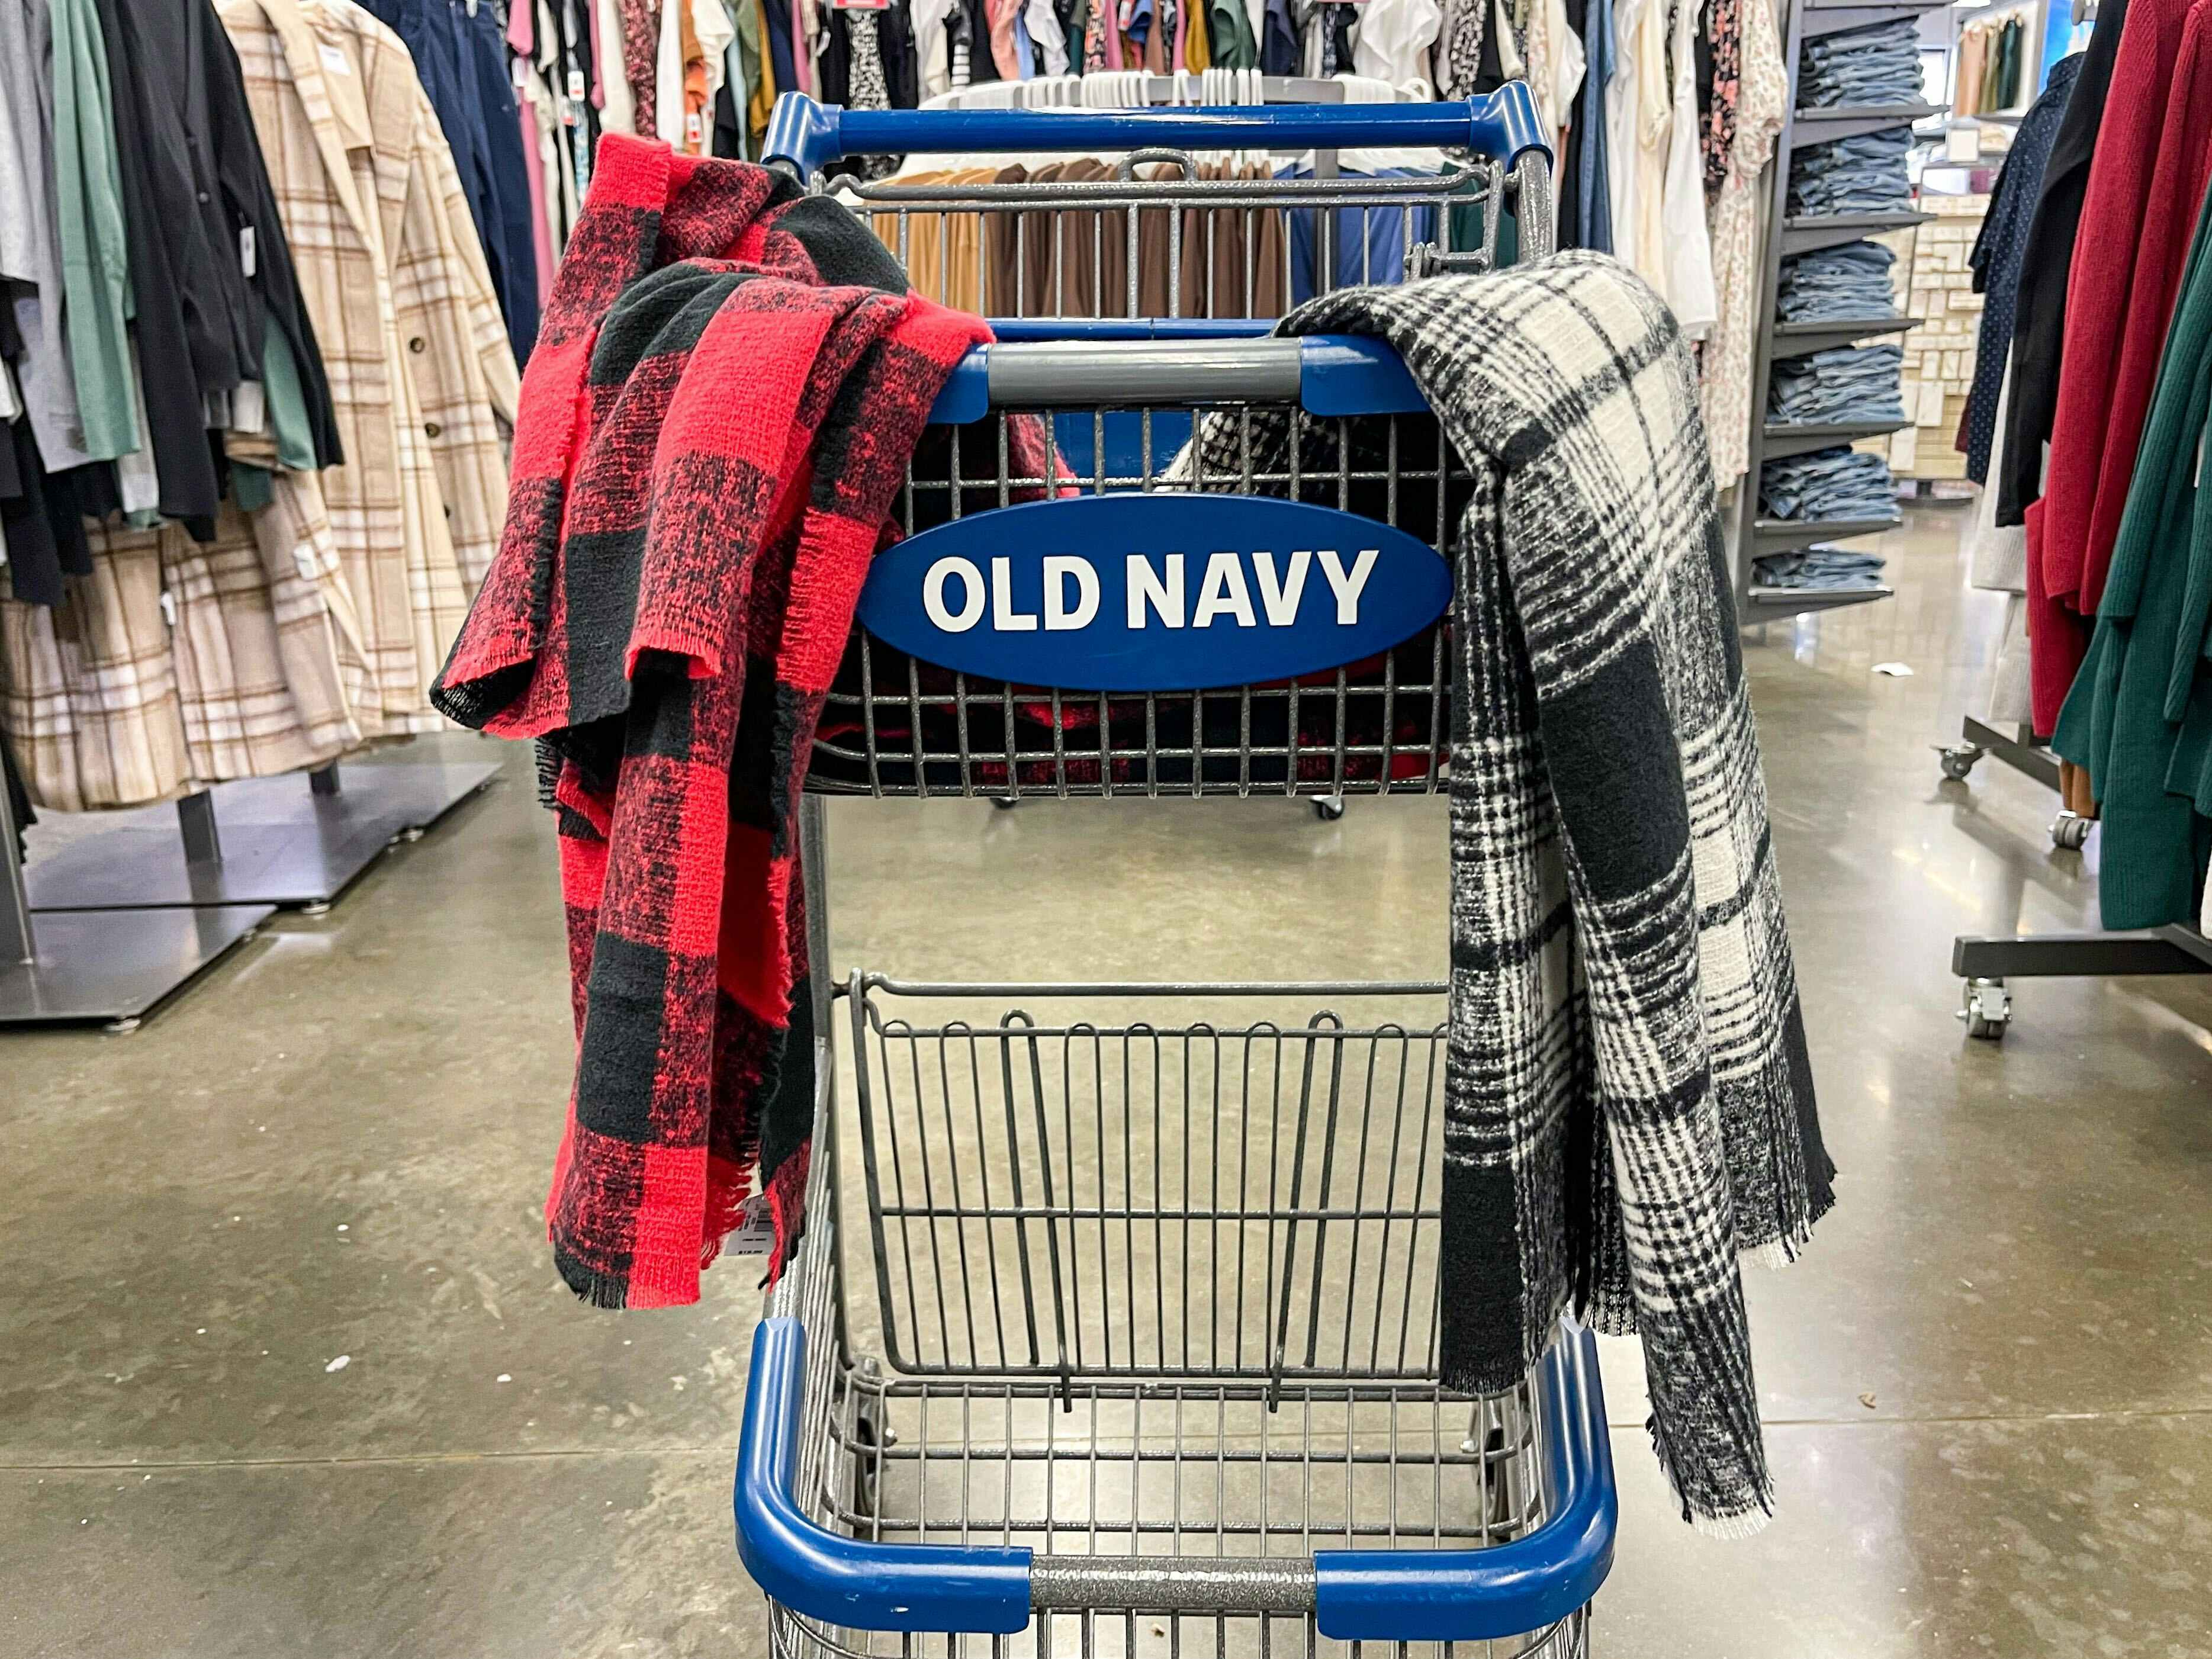 old navy scarves in shopping cart